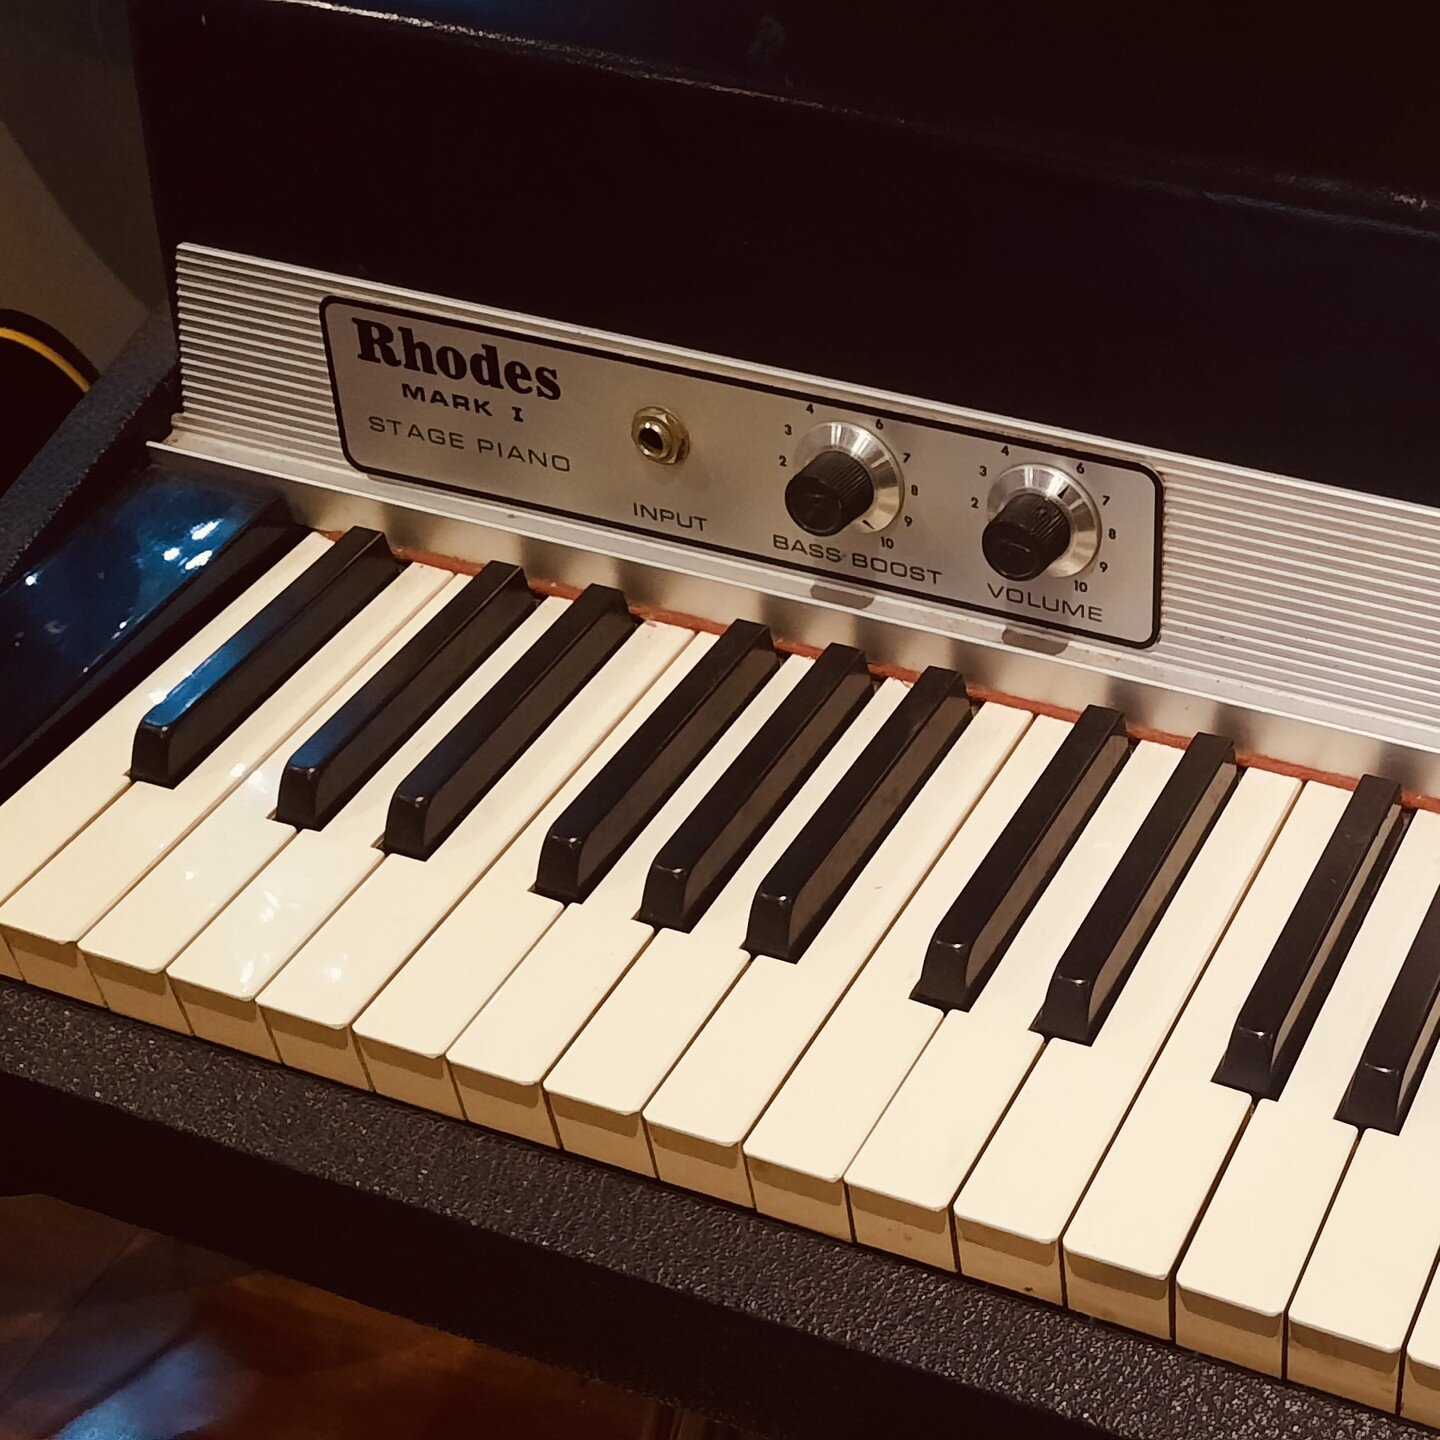 Thankfully this will never be replaced by a plug in ,, Fender Rhodes Mark 1 88 Key Stage Piano from 1972 
A thing of beauty